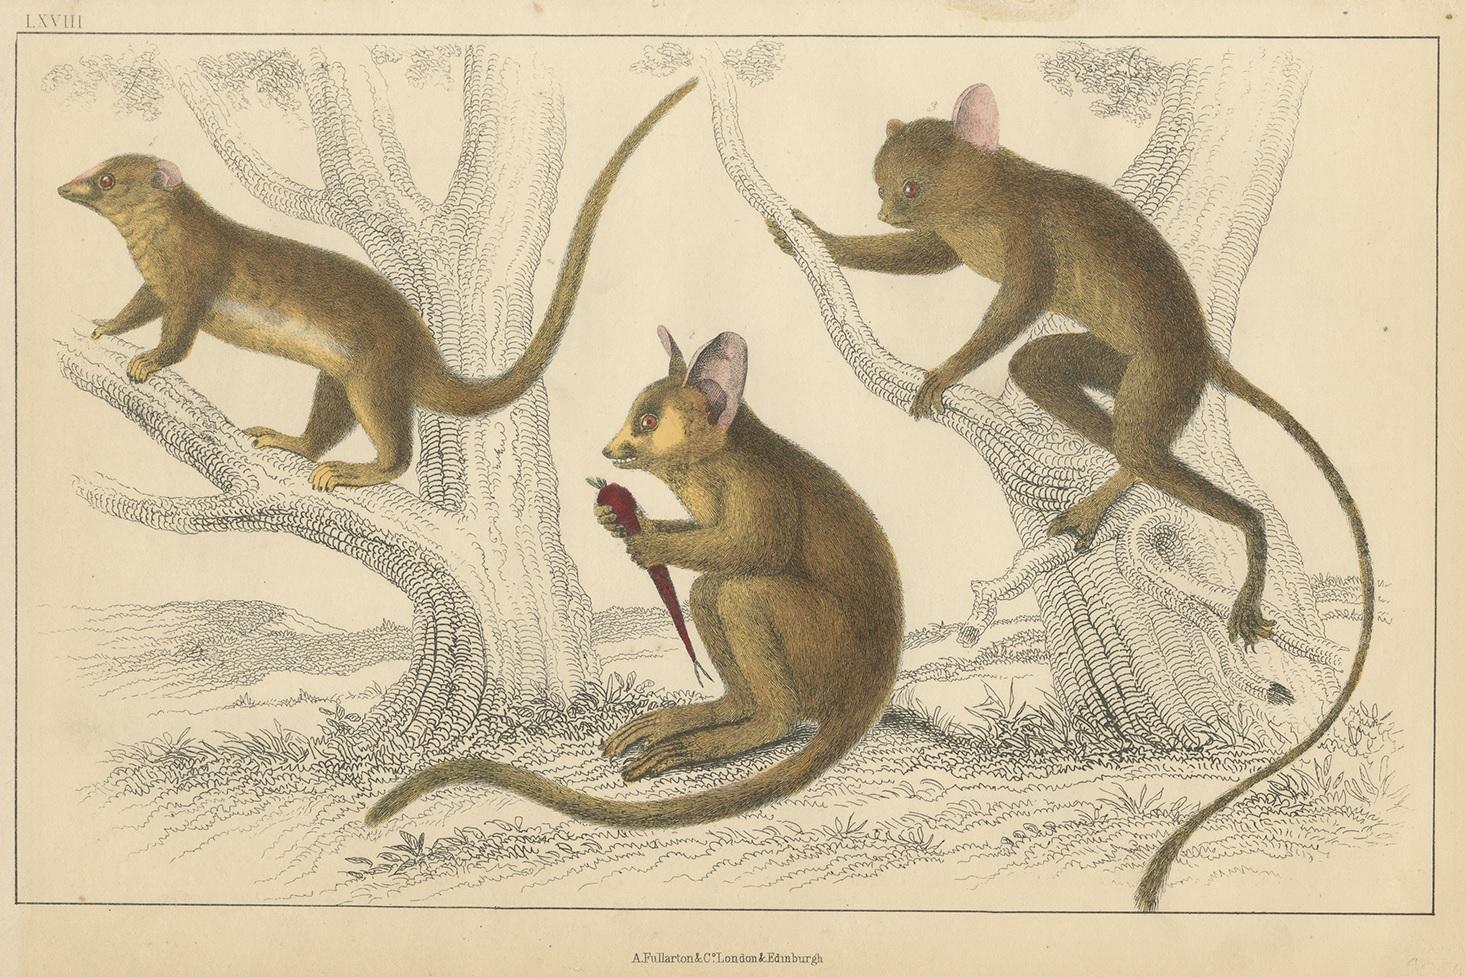 Antique print of a Little Galago, Podje Tarsier and Senegal Tarsier. This print originates from 'A History of the Earth and Animated Nature' by Oliver Goldsmith. Published by A. Fullarton & Co, circa 1850.